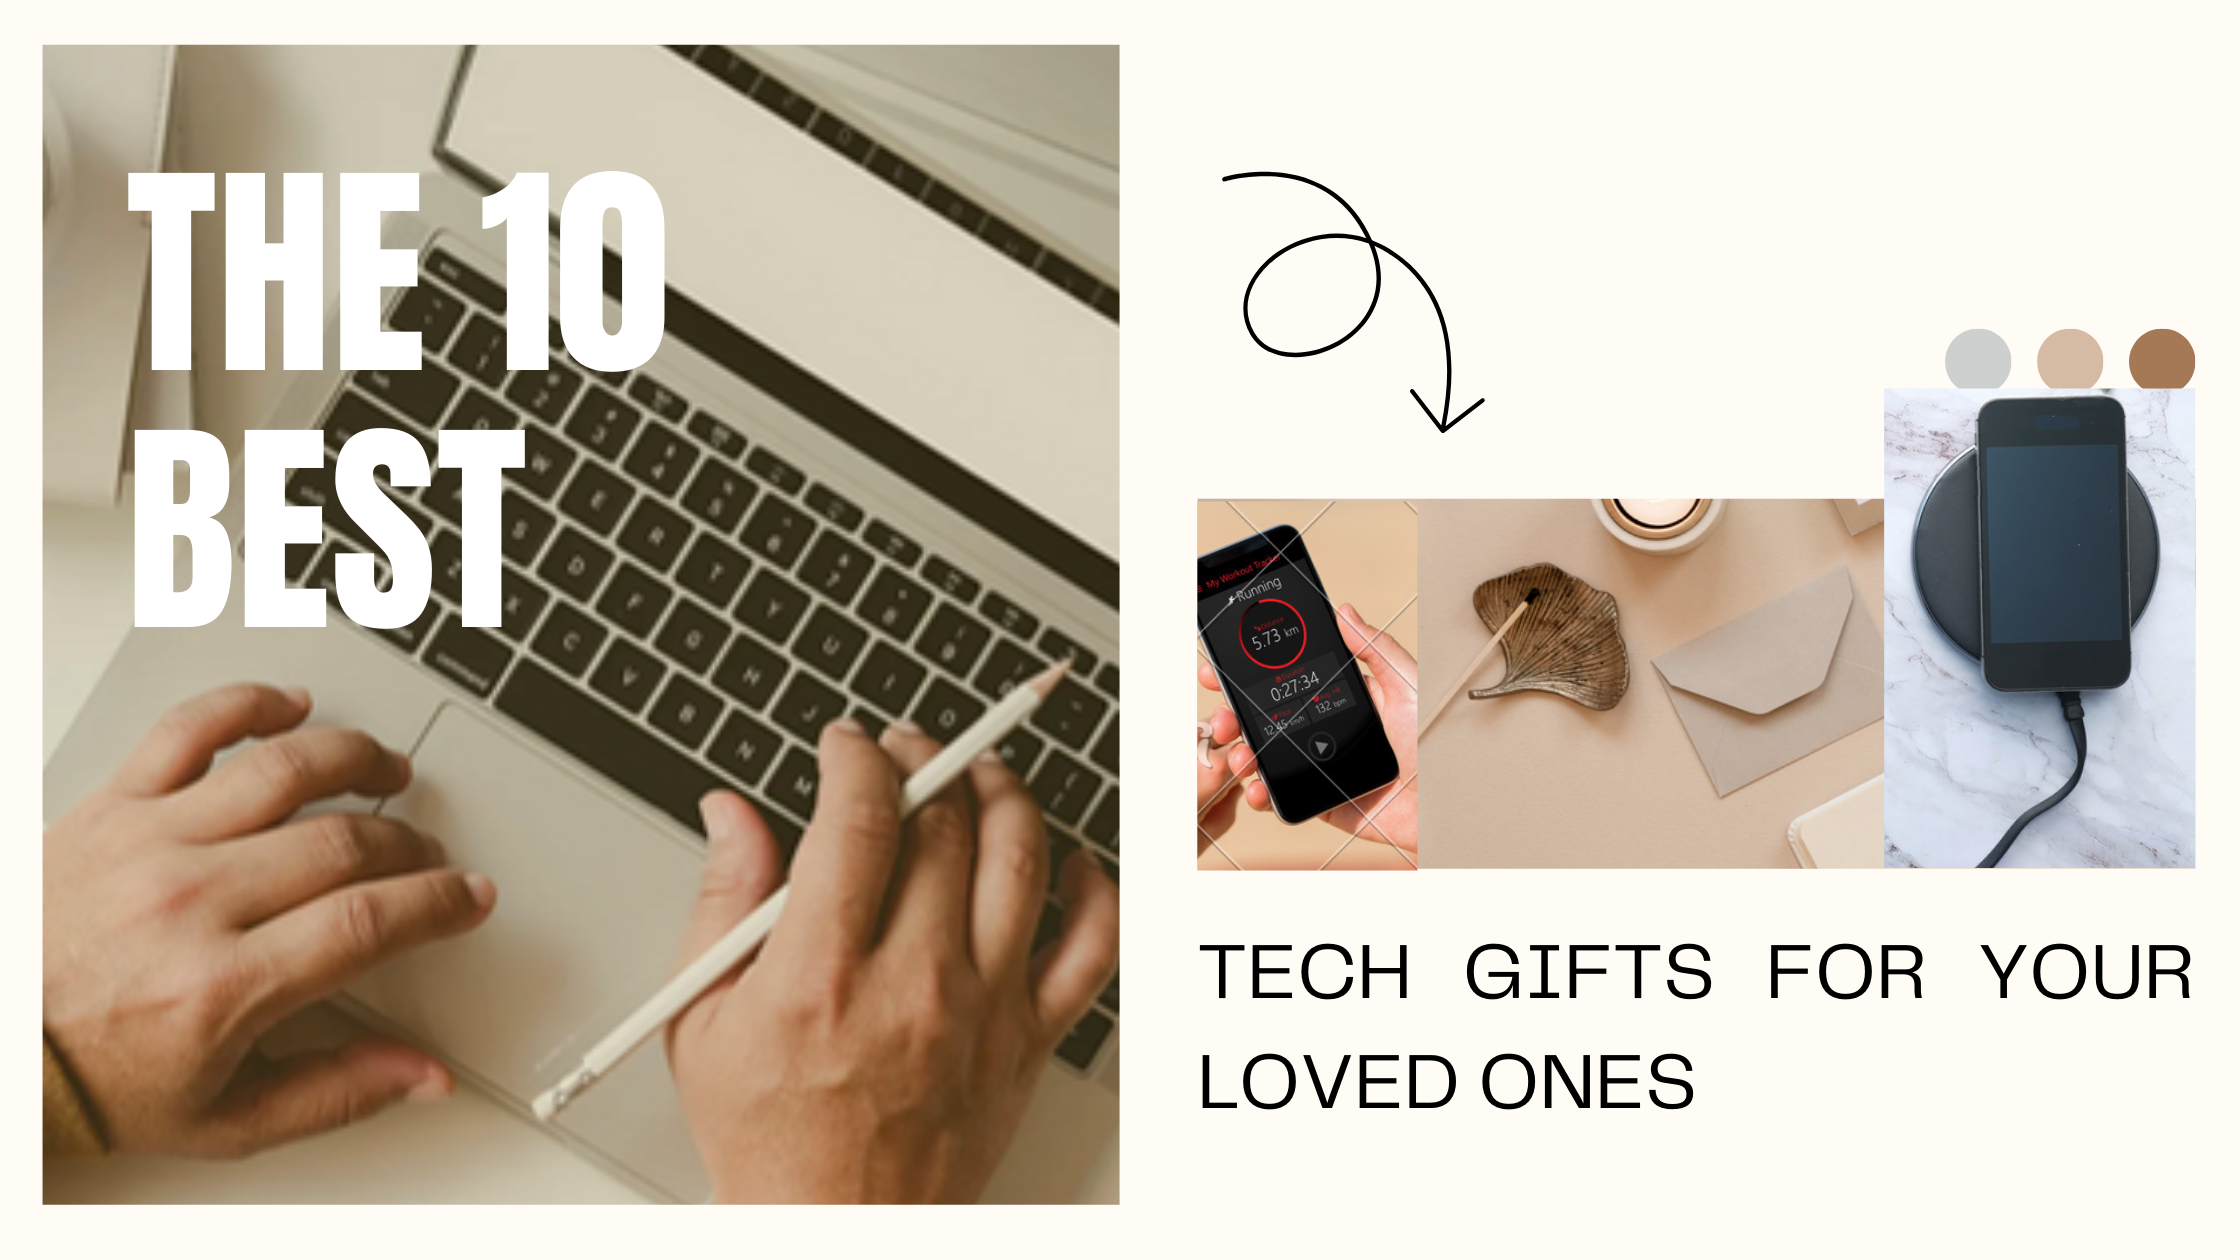 Best tech gifts for your loved ones